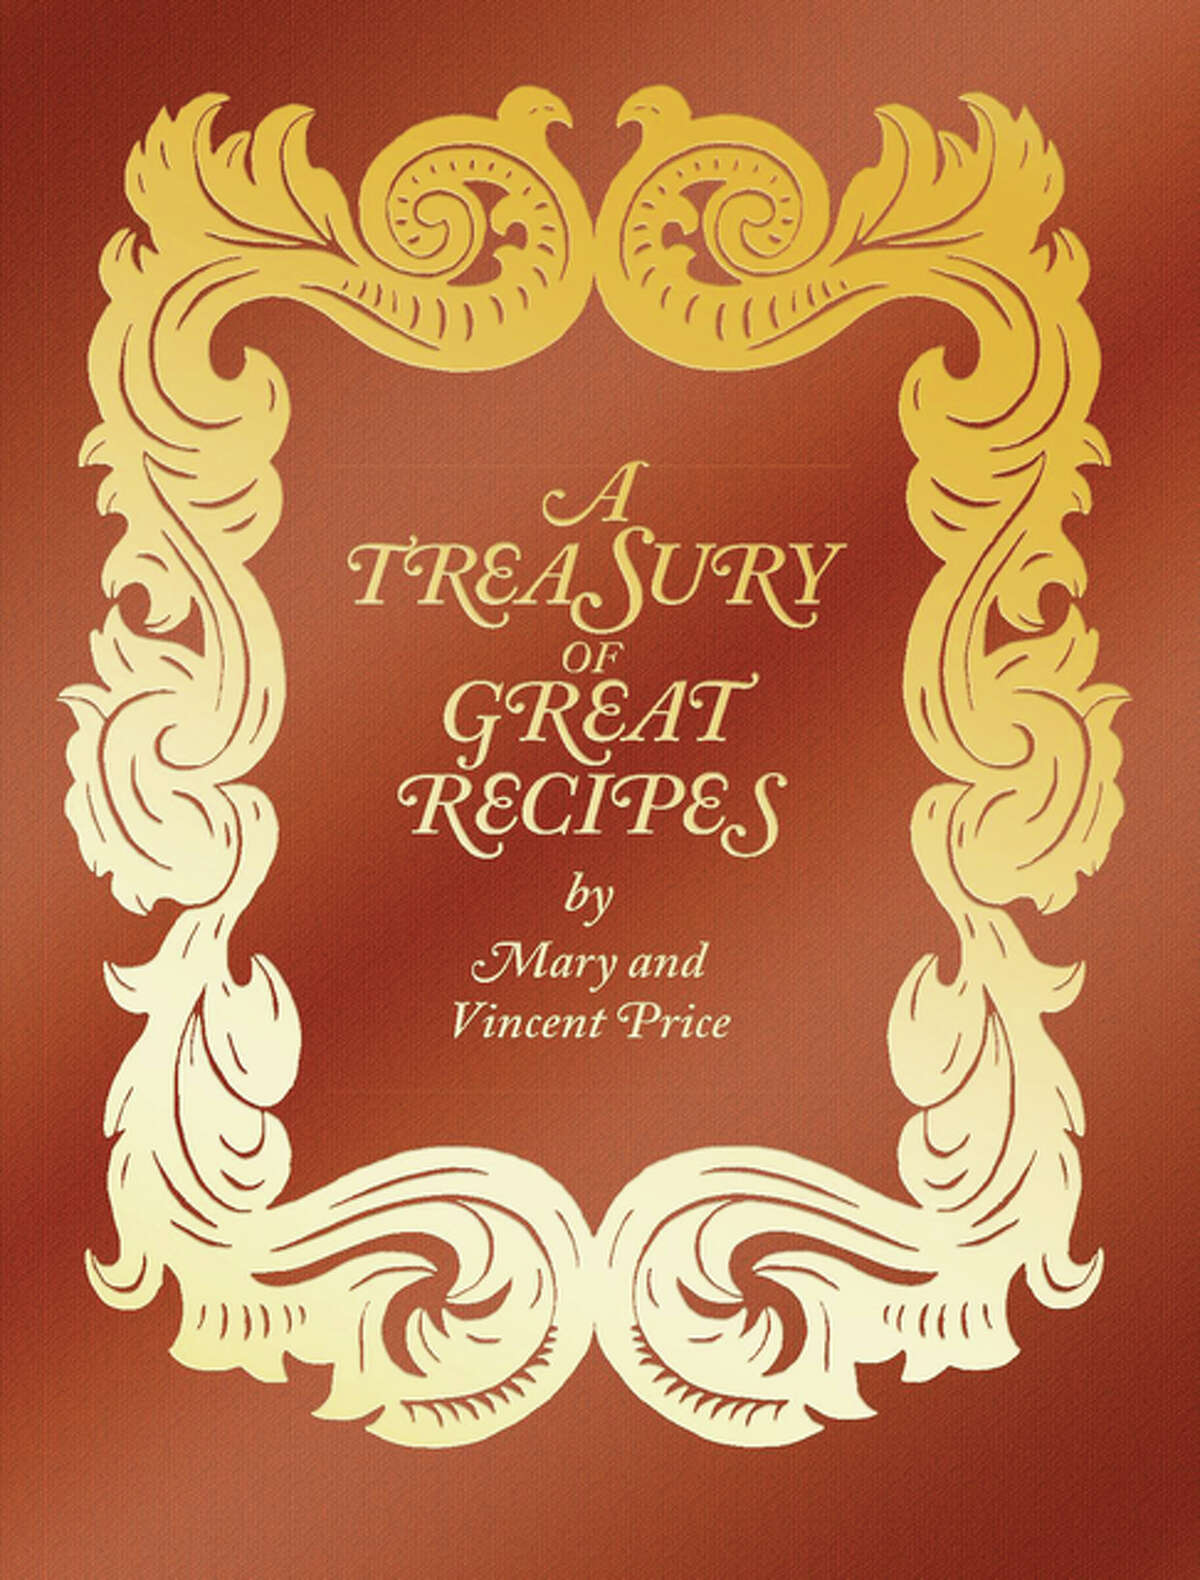 “A Treasury of Great Recipes” was first published in 1965.